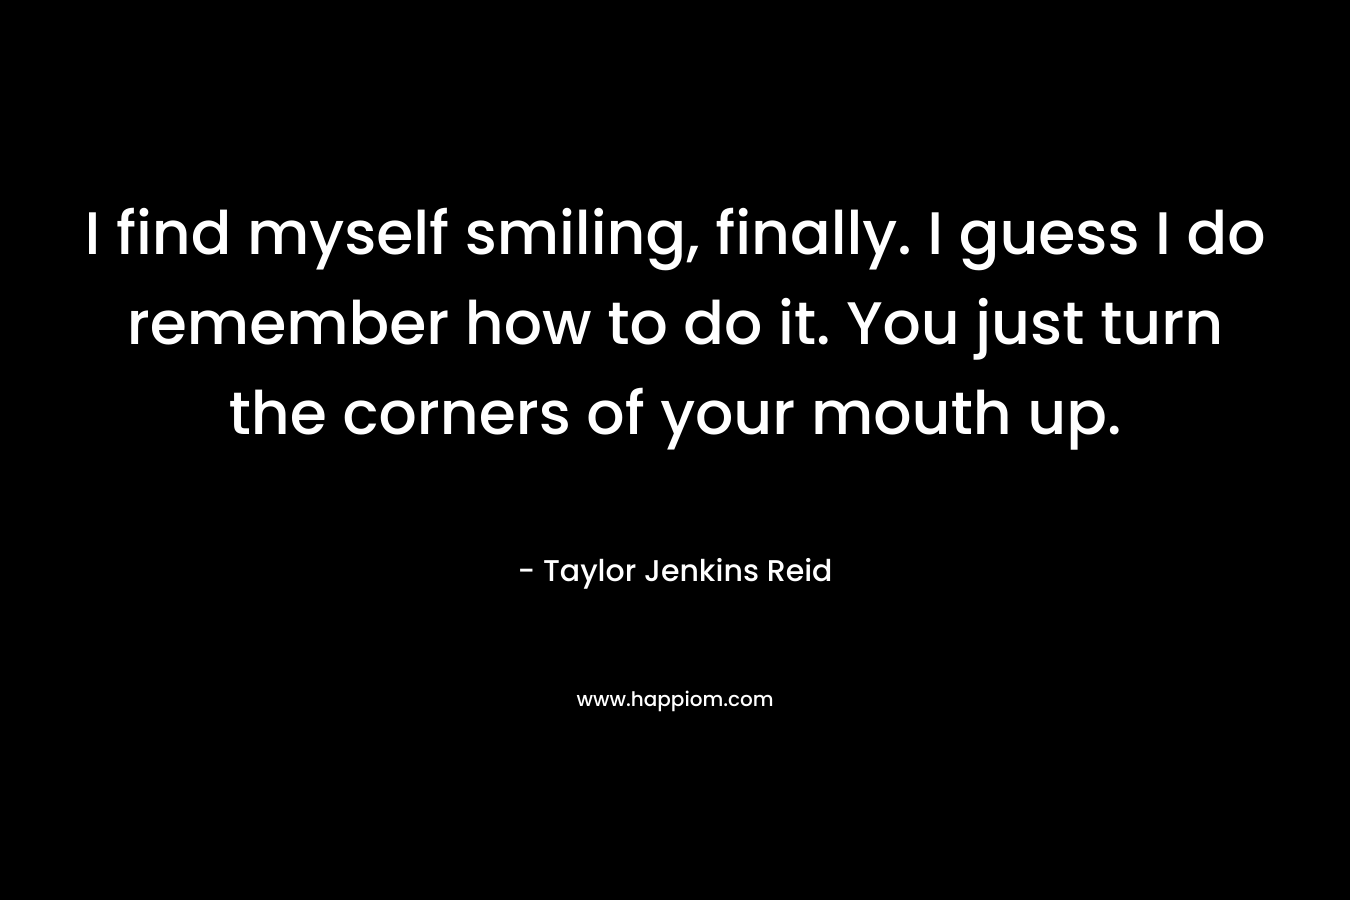 I find myself smiling, finally. I guess I do remember how to do it. You just turn the corners of your mouth up. – Taylor Jenkins Reid